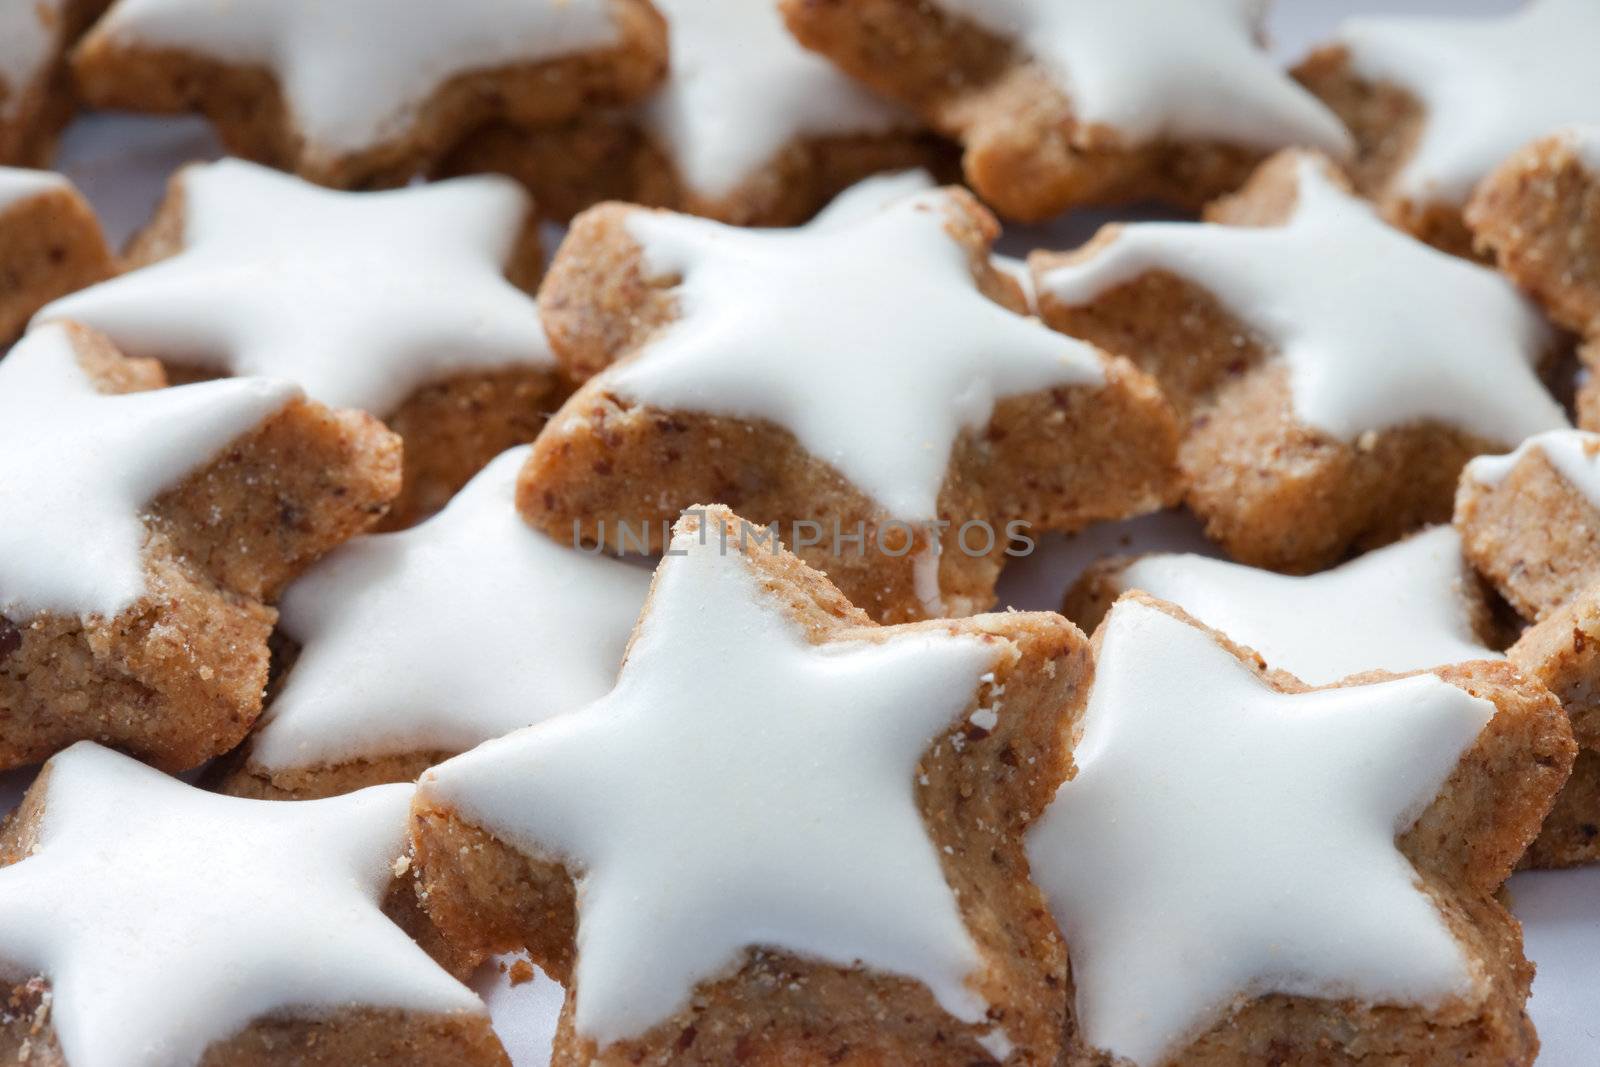 Traditional holliday homemade star-shaped sugar iced cookies